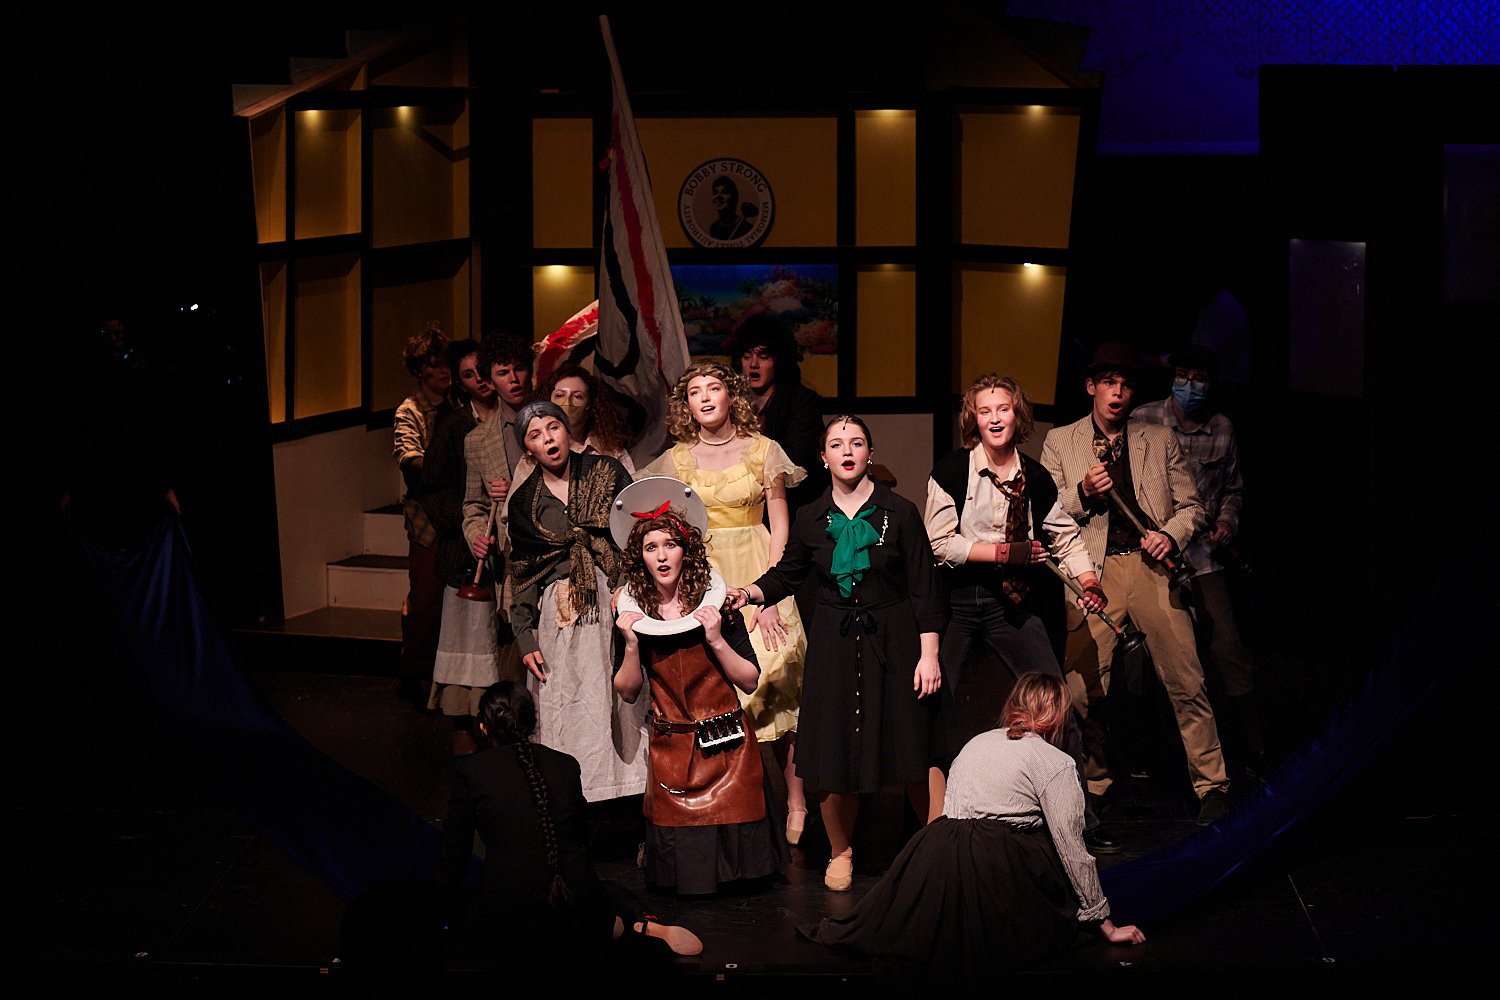  SEWICKLEY, PA, USA - MARCH 2ND 2022: High School students of Sewickley Academy are performing in an annual musical show “Urinetown” running on March 3rd-5th 2022. Claire Cable 